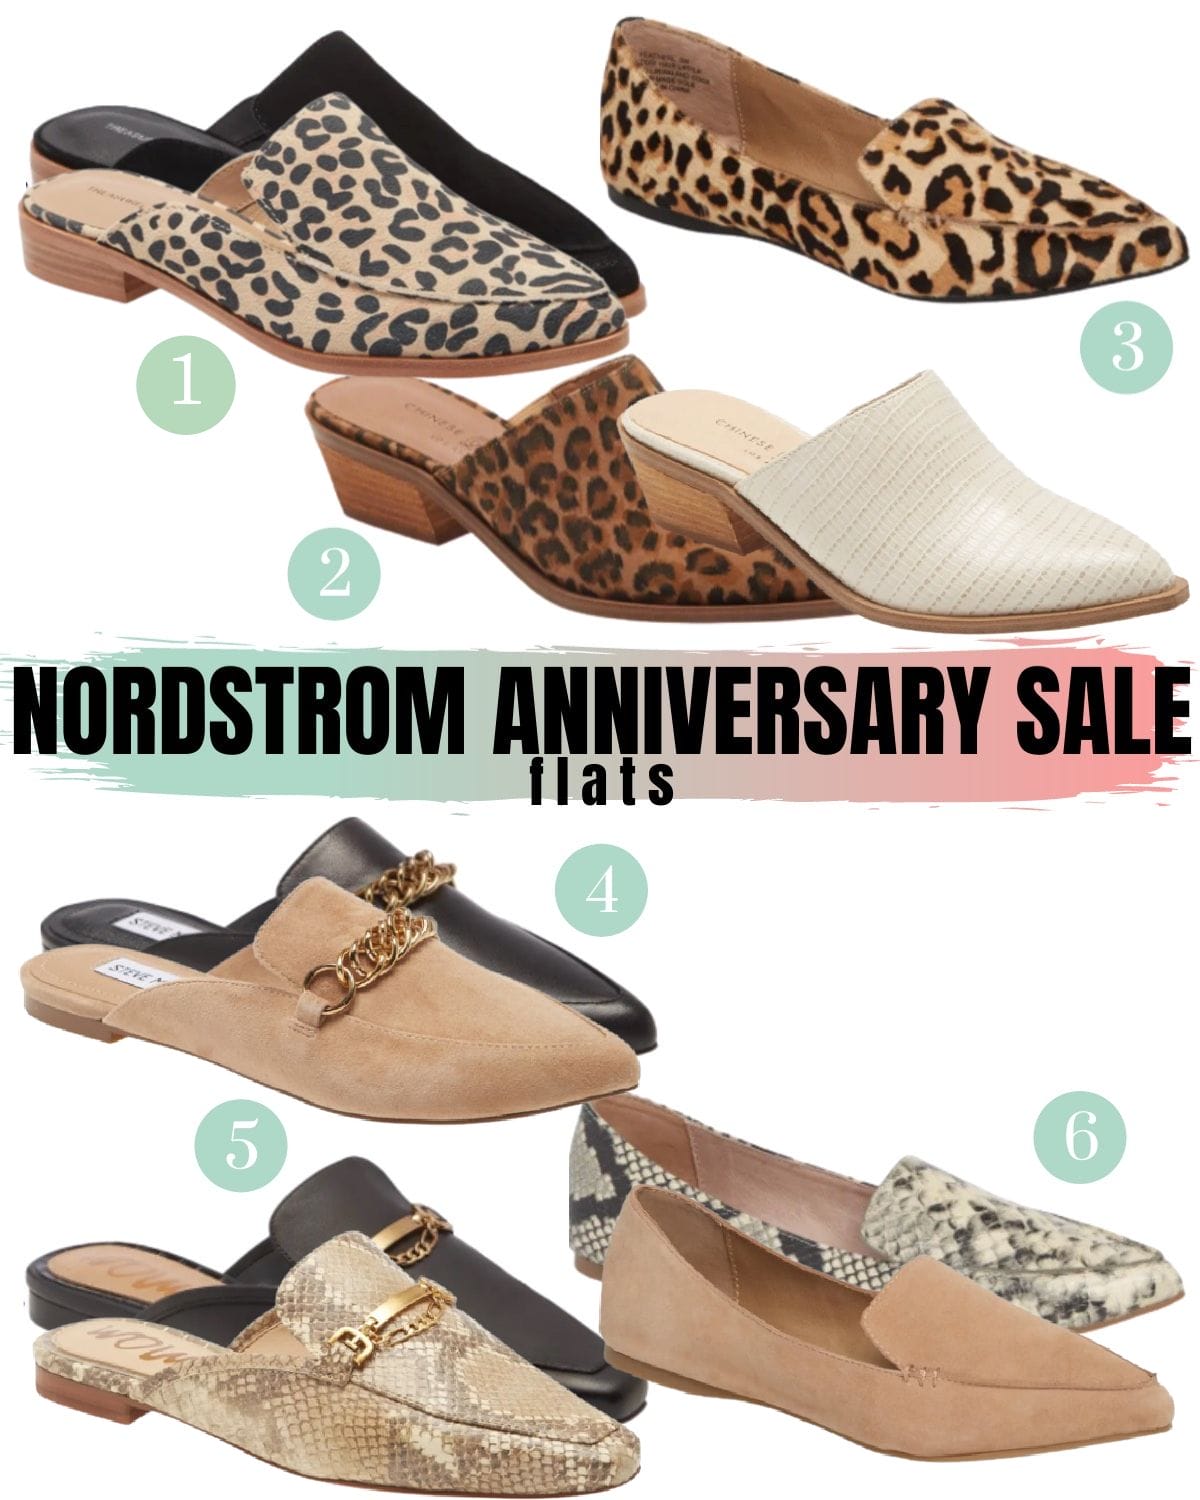 Nordstrom Anniversary Sale Flats and Mules